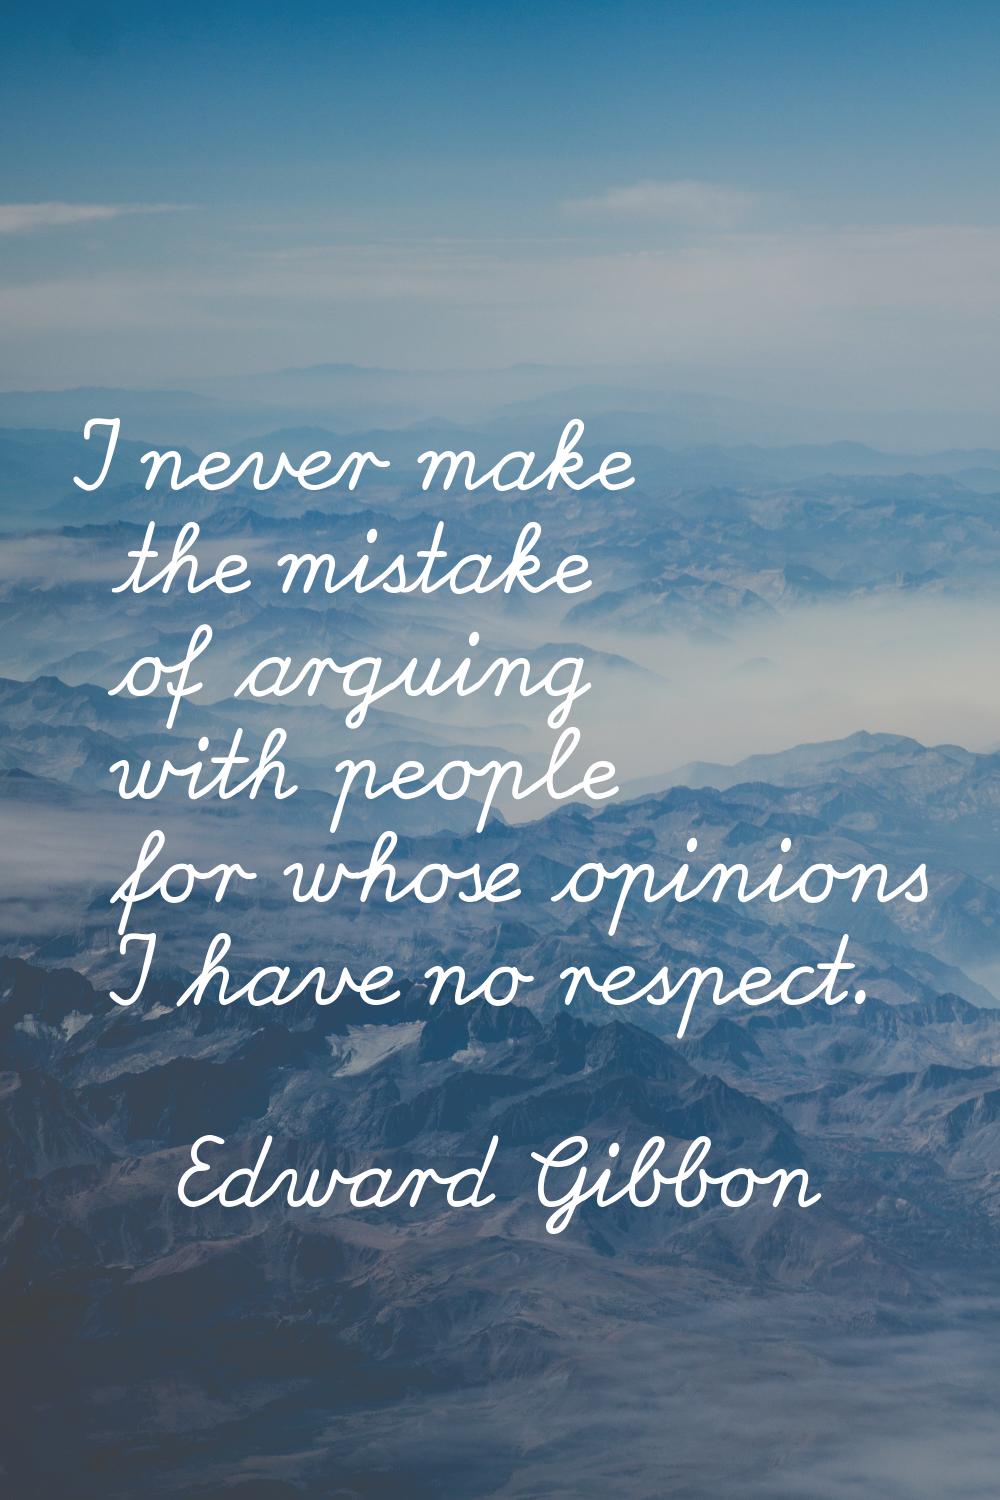 I never make the mistake of arguing with people for whose opinions I have no respect.